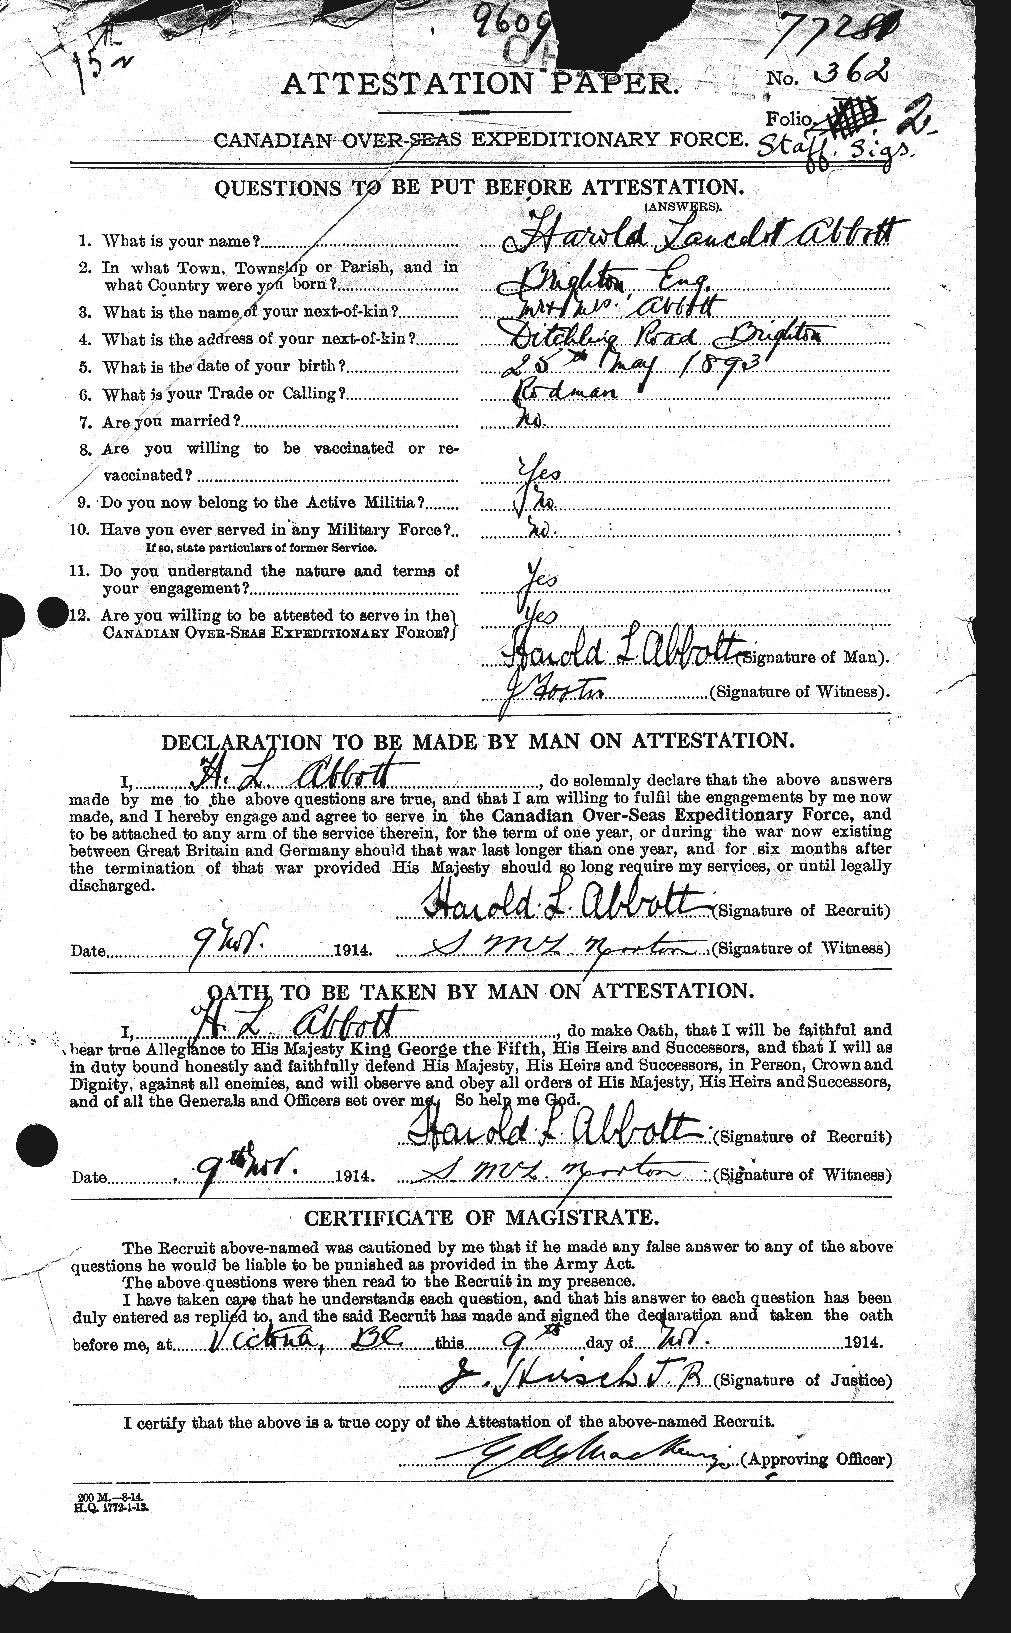 Personnel Records of the First World War - CEF 200957a